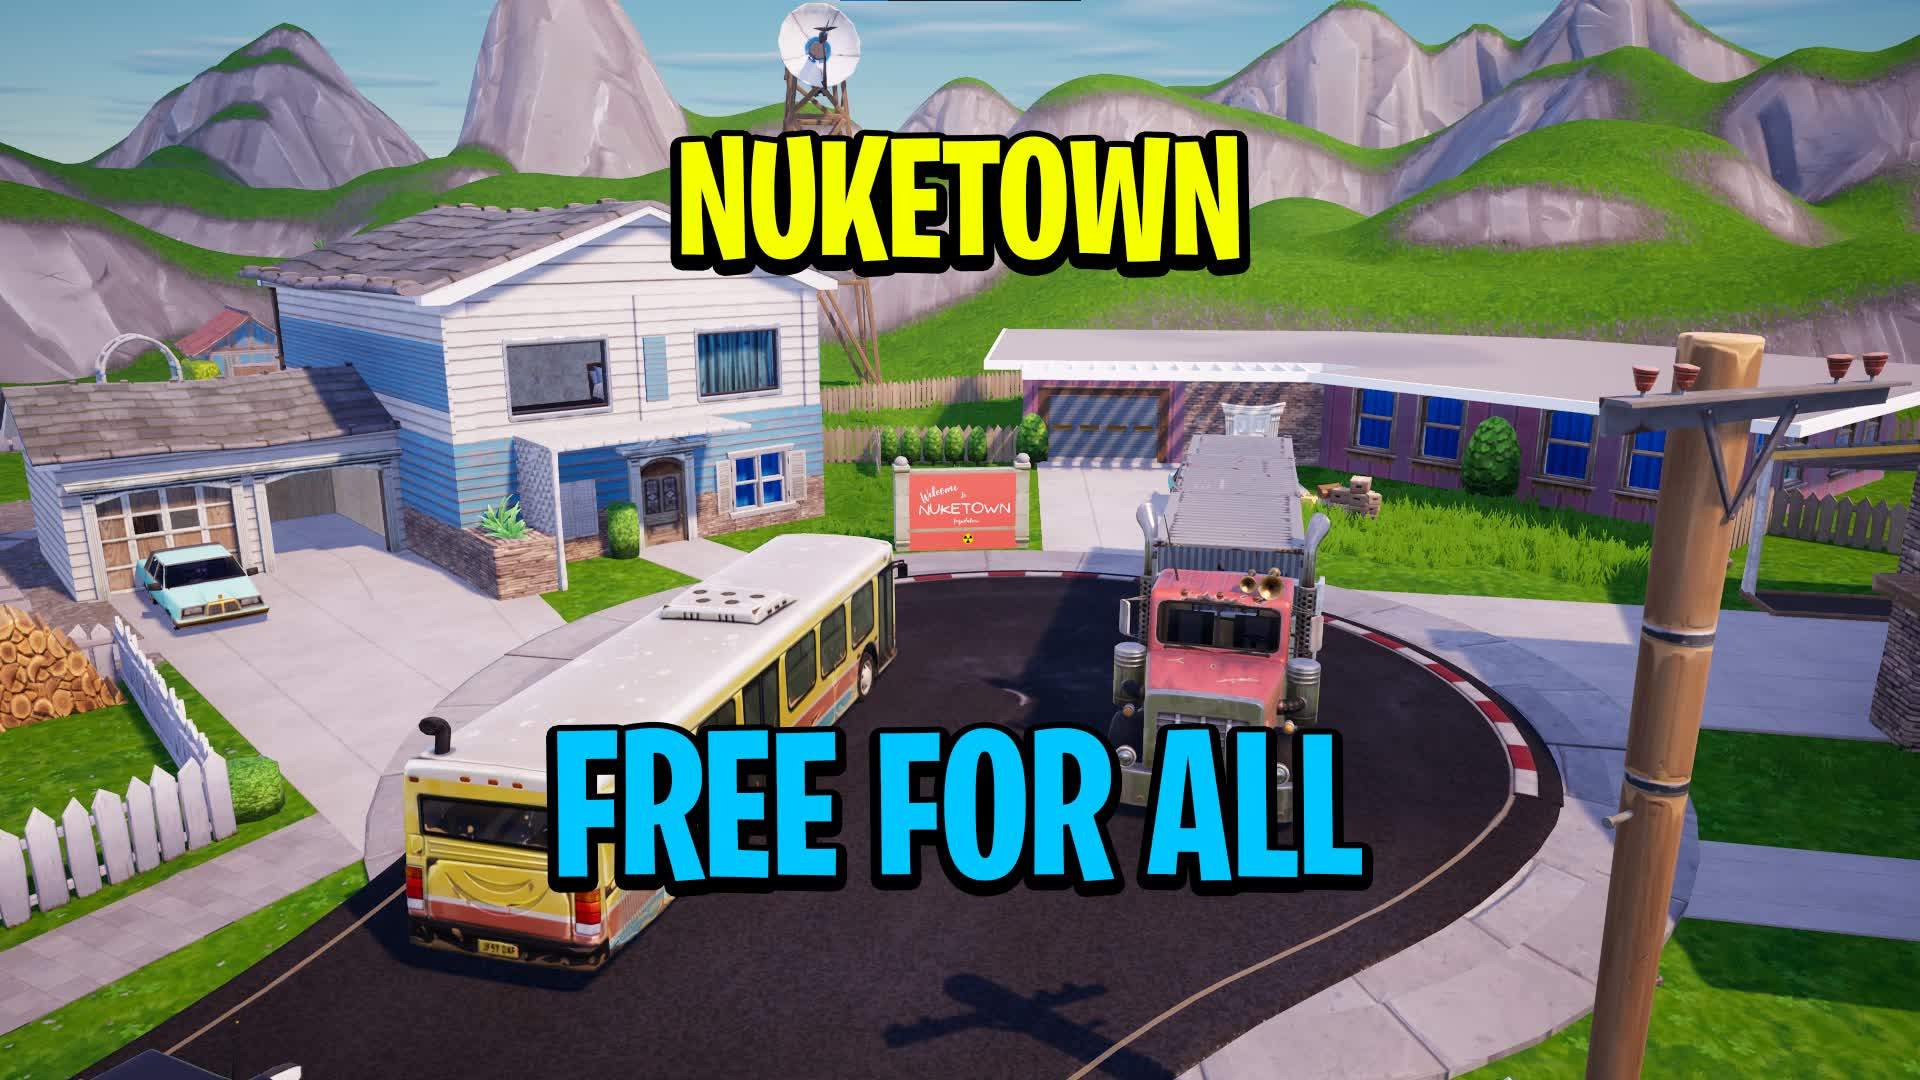 NUKETOWN FREE FOR ALL